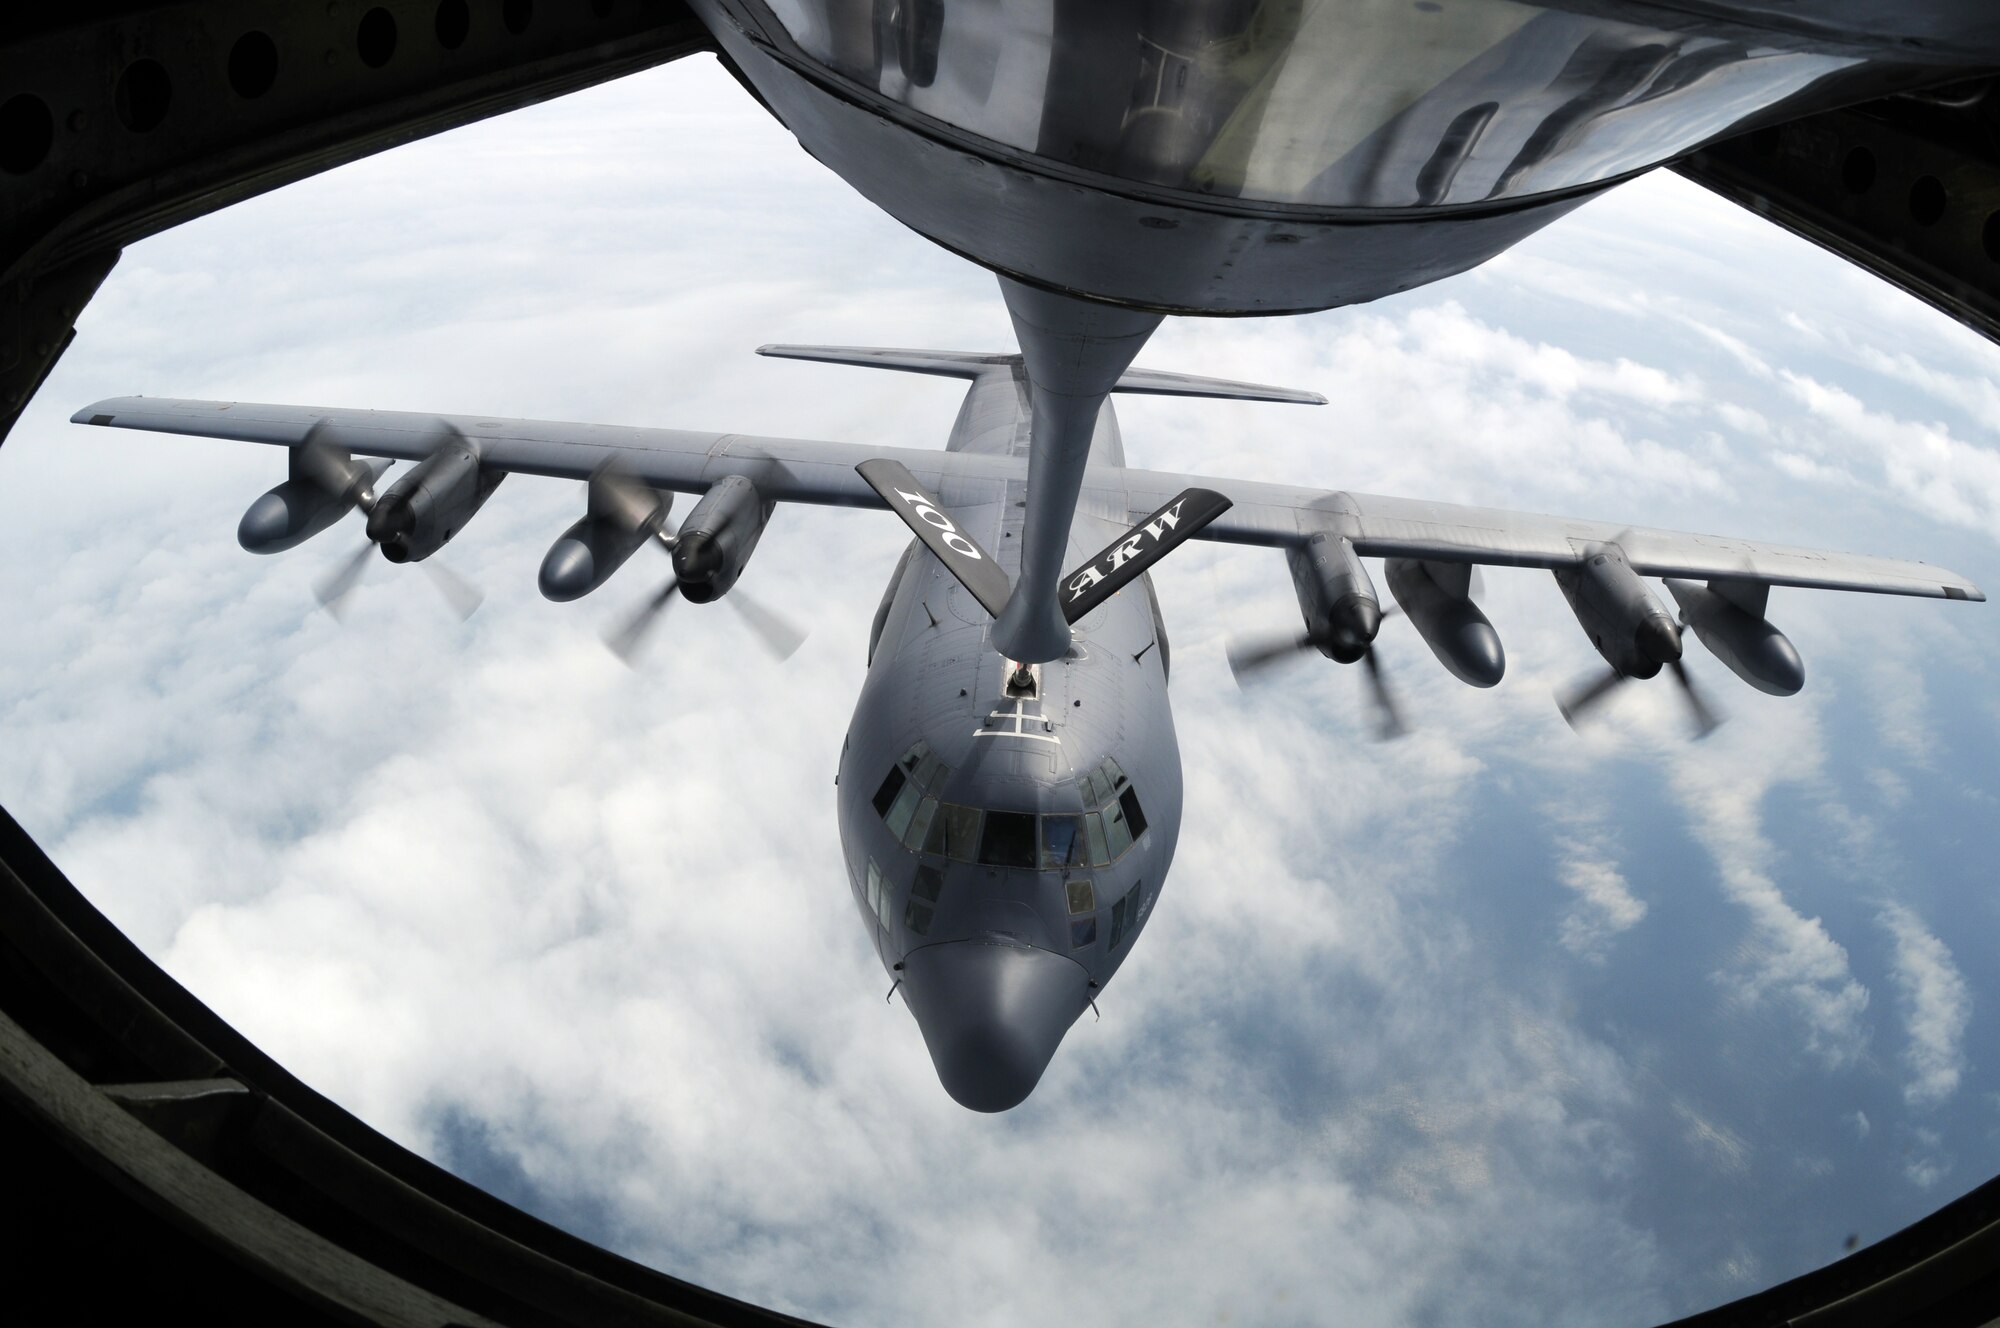 An MC-130P Combat Shadow refueling aircraft from the 352nd Special Operations Group refuels from a 100th Air Refueling Wing KC-135 over the Atlantic Ocean during a sea rescue mission June 26.  The two aircraft were part of a group of five from the United States and England which participated in a mission to pluck a sick man from a ship off the coast of Ireland and deliver him to a medical treatment facility.  (U.S. Air Force photo by Staff Sgt. Austin M. May)